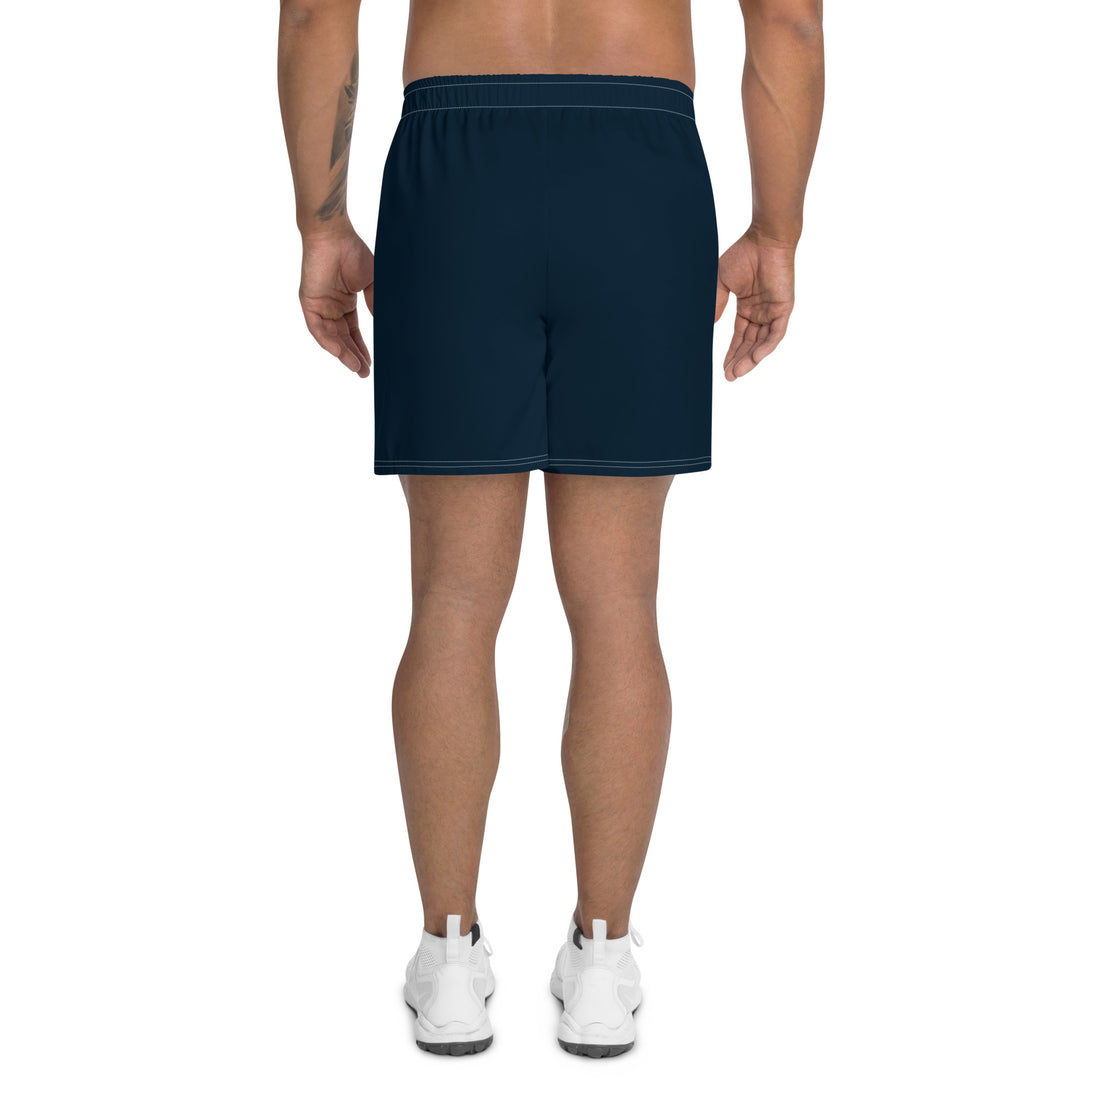 Rich Lively 002 Boca Raton Picklers™ SKYblue™ 2023 Authentic Shorts for Men - Dark Blue